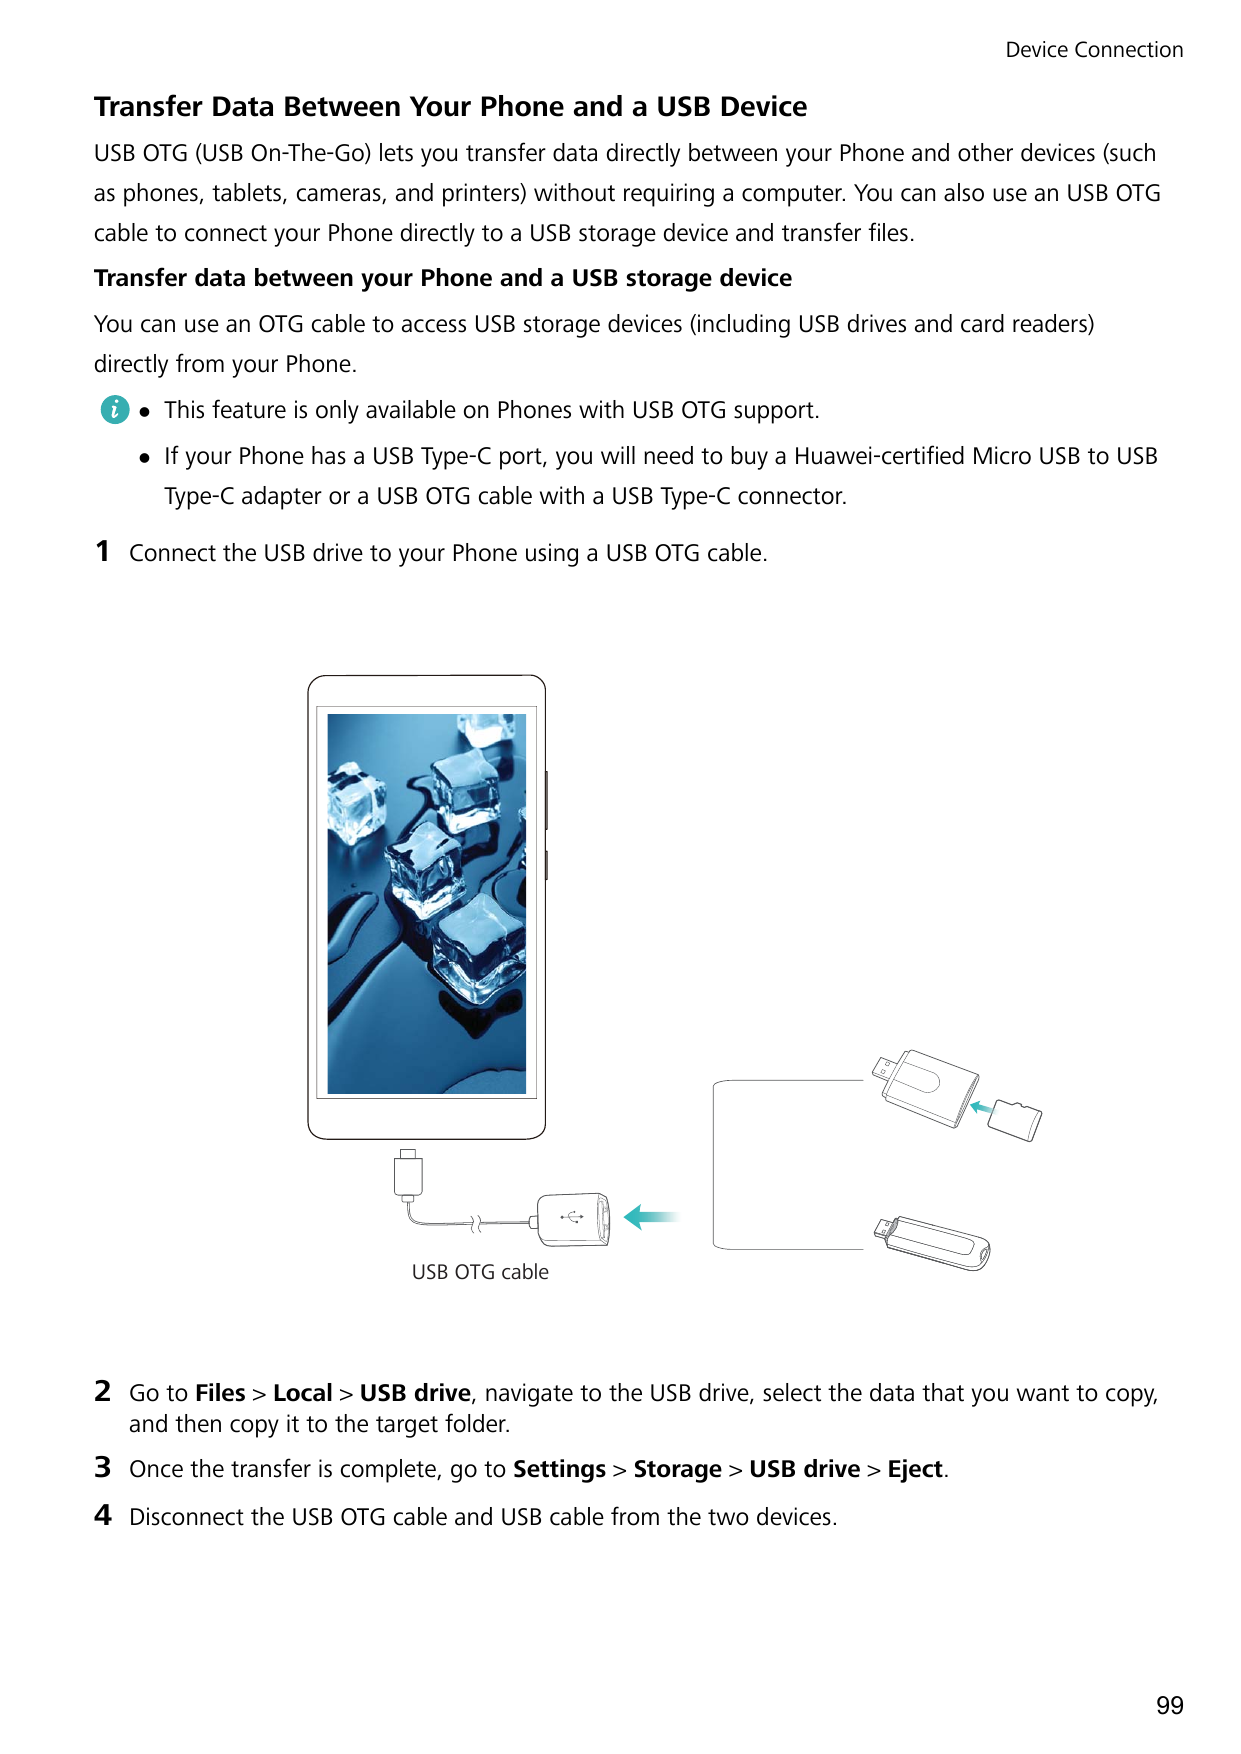 Device ConnectionTransfer Data Between Your Phone and a USB DeviceUSB OTG (USB On-The-Go) lets you transfer data directly betwee